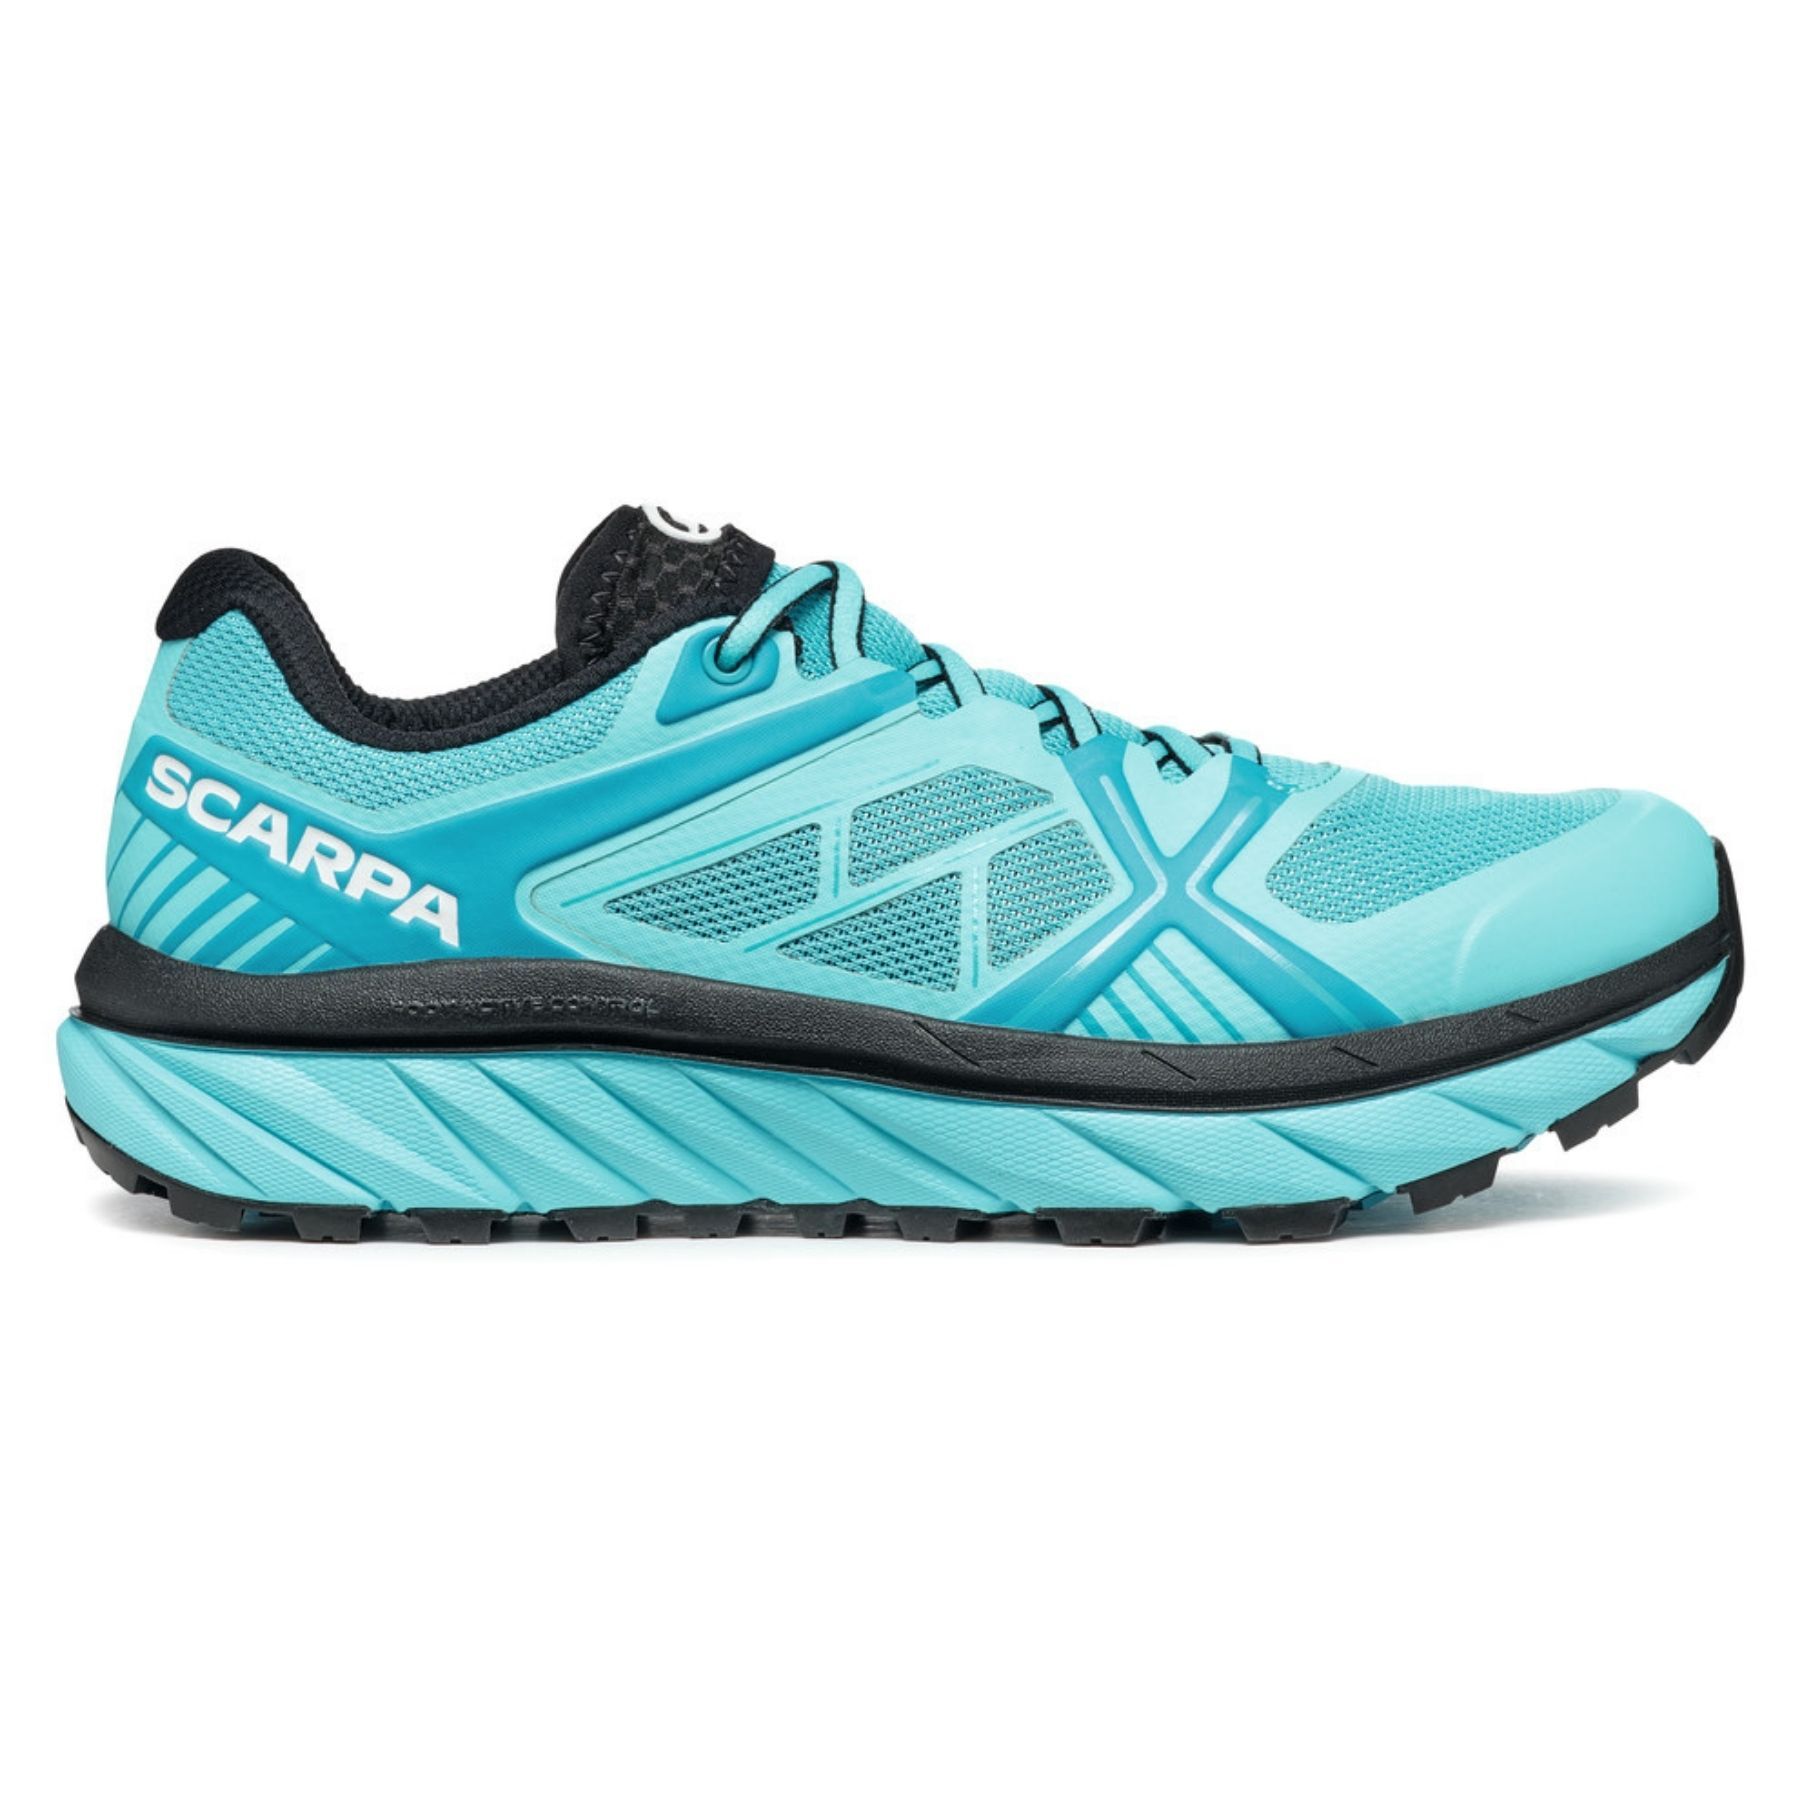 Scarpa Spin Infinity Wmn - Trail running shoes - Women's